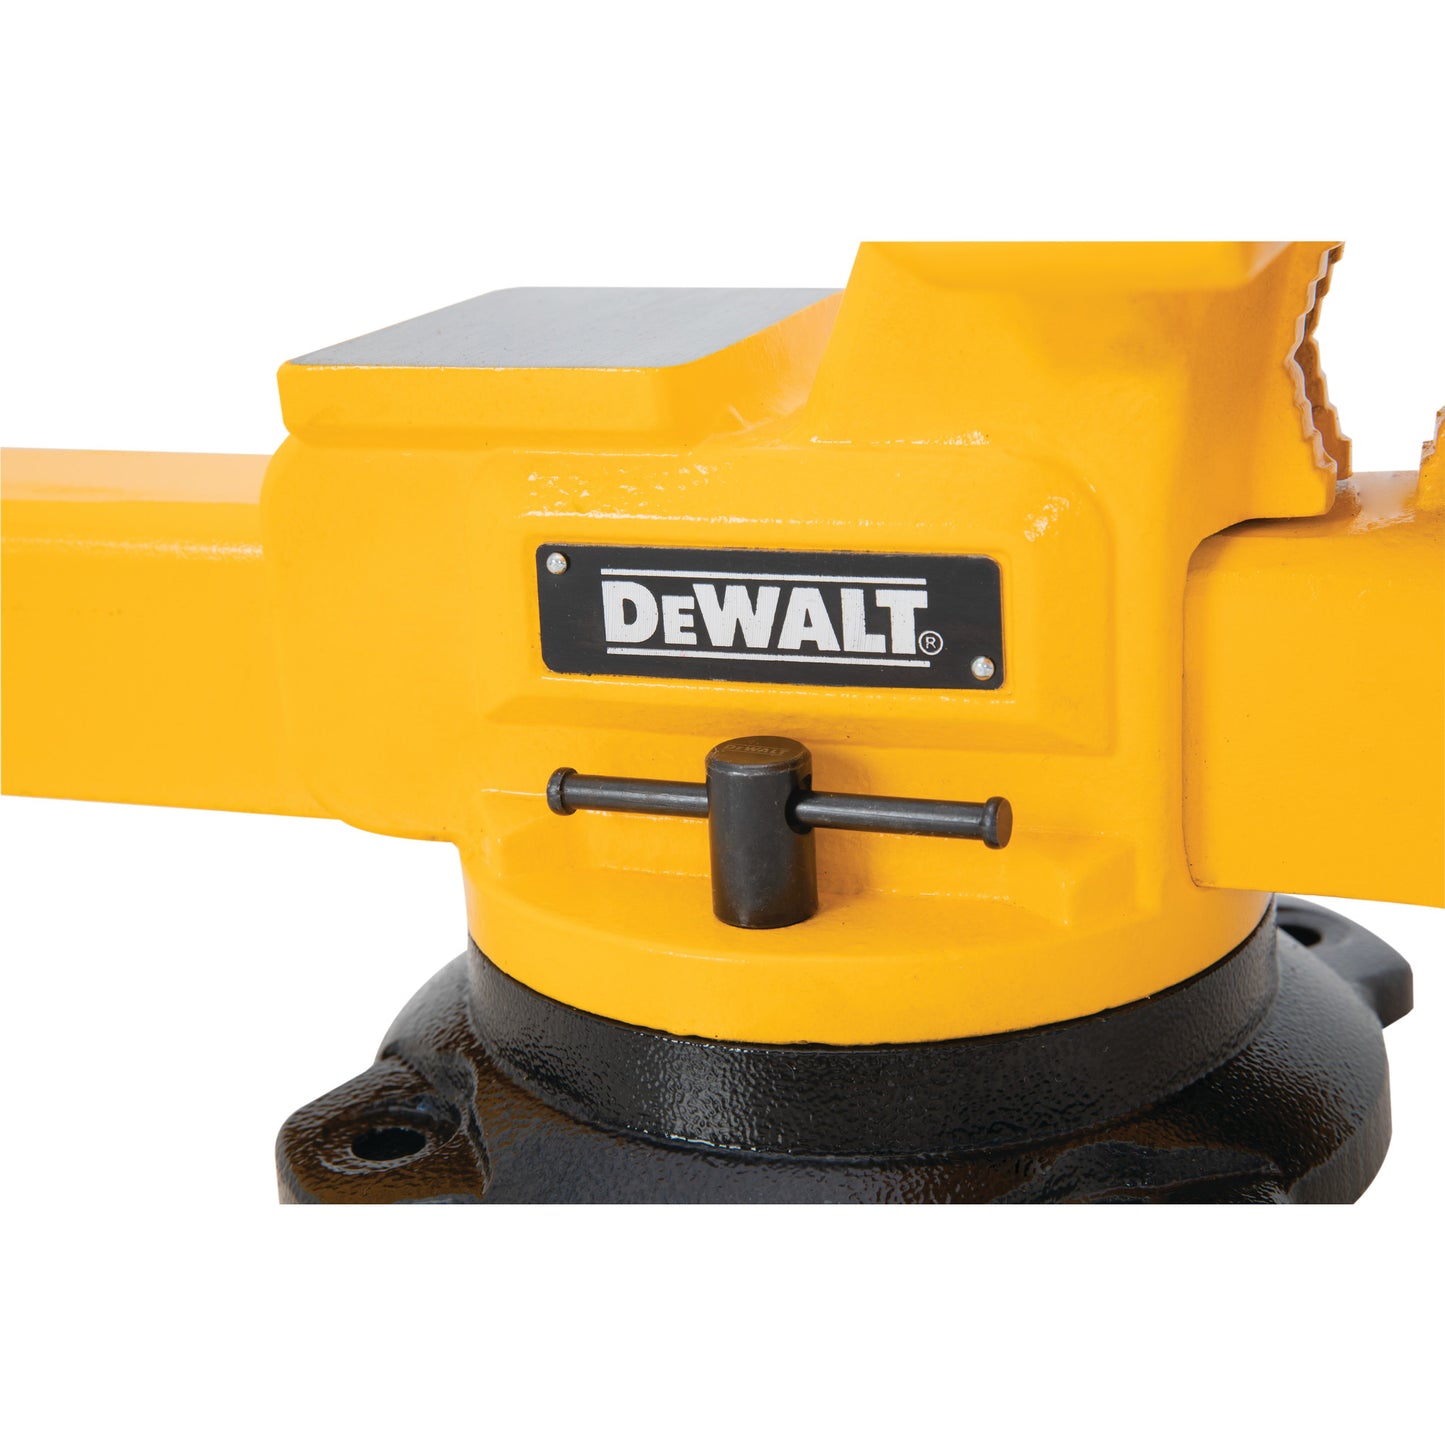 10-Inch 4400lb Capacity Bench Vise with Anvil in Yellow & Black